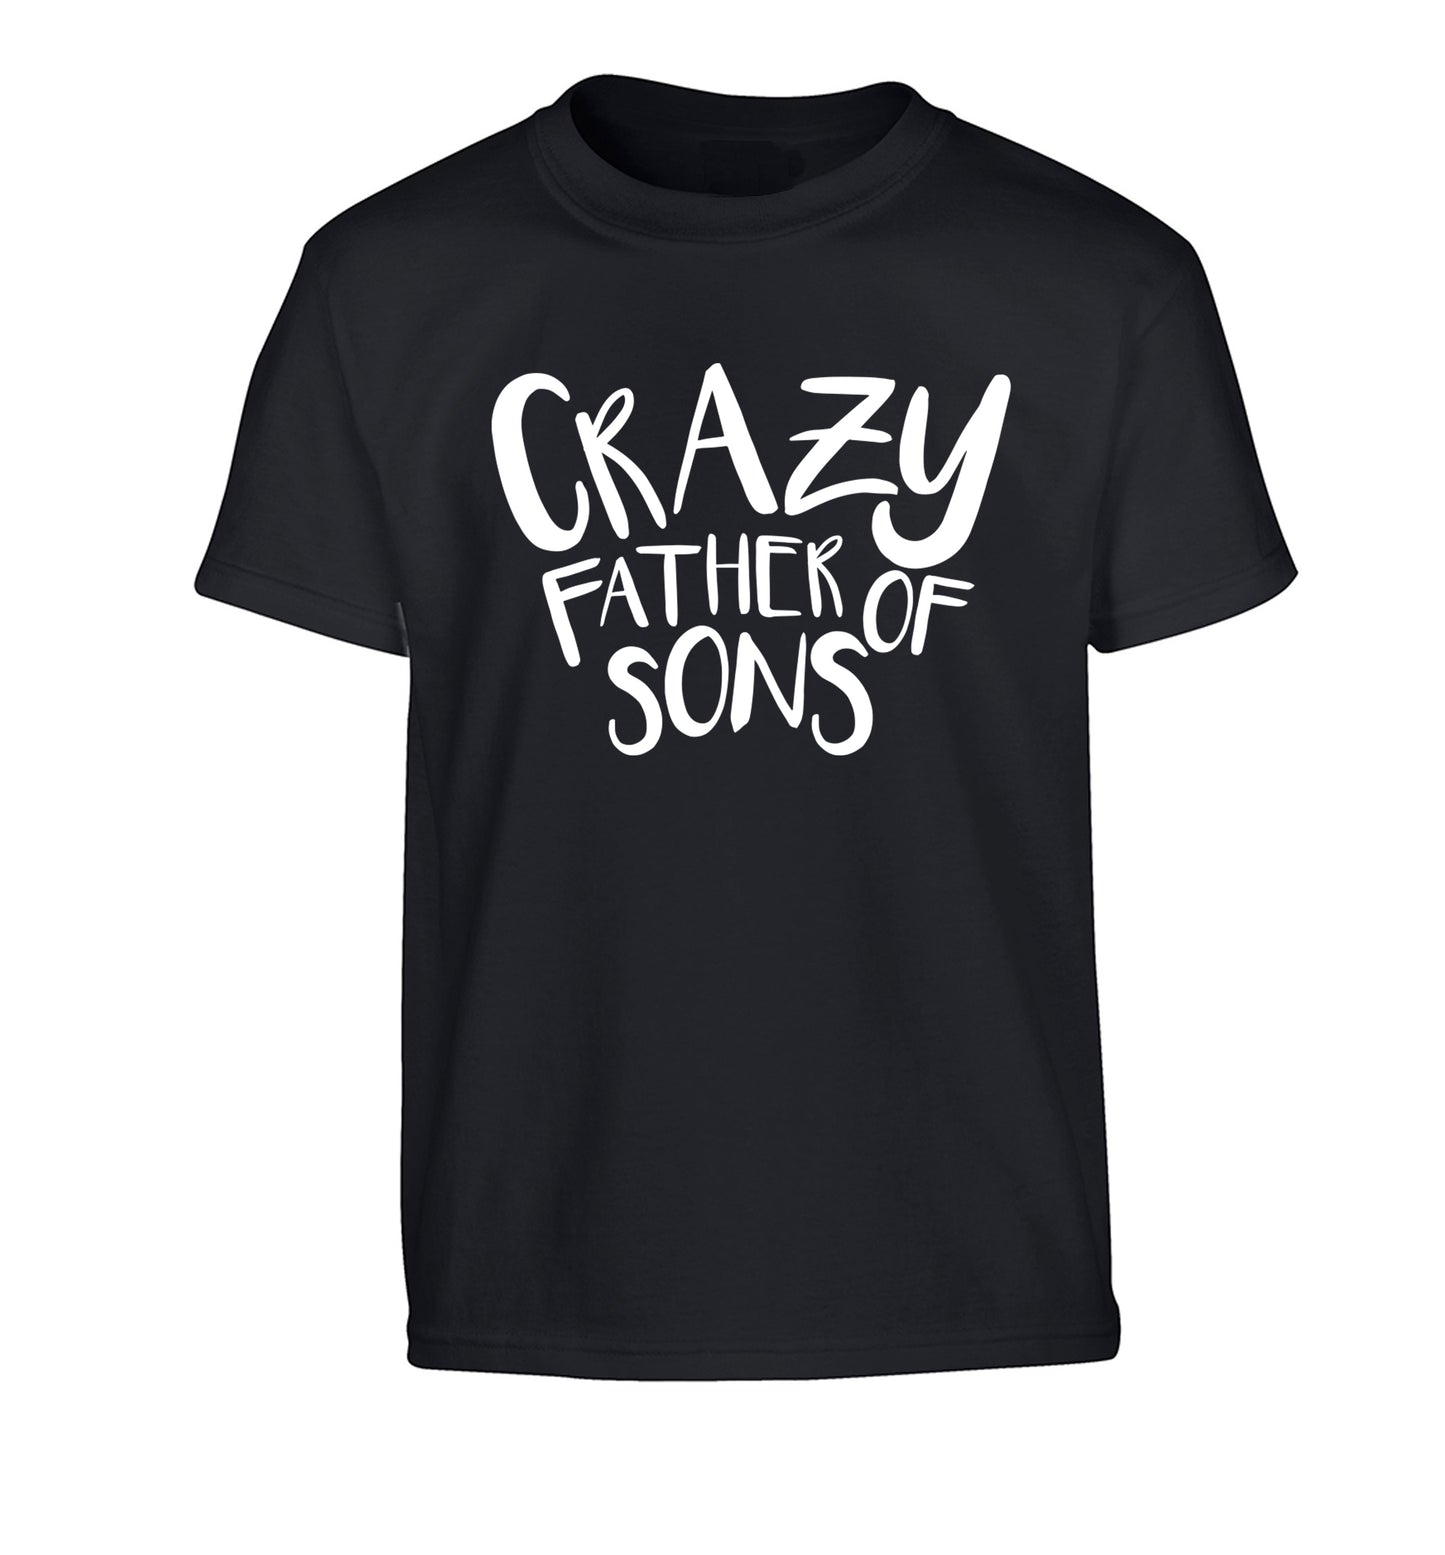 Crazy father of sons Children's black Tshirt 12-13 Years